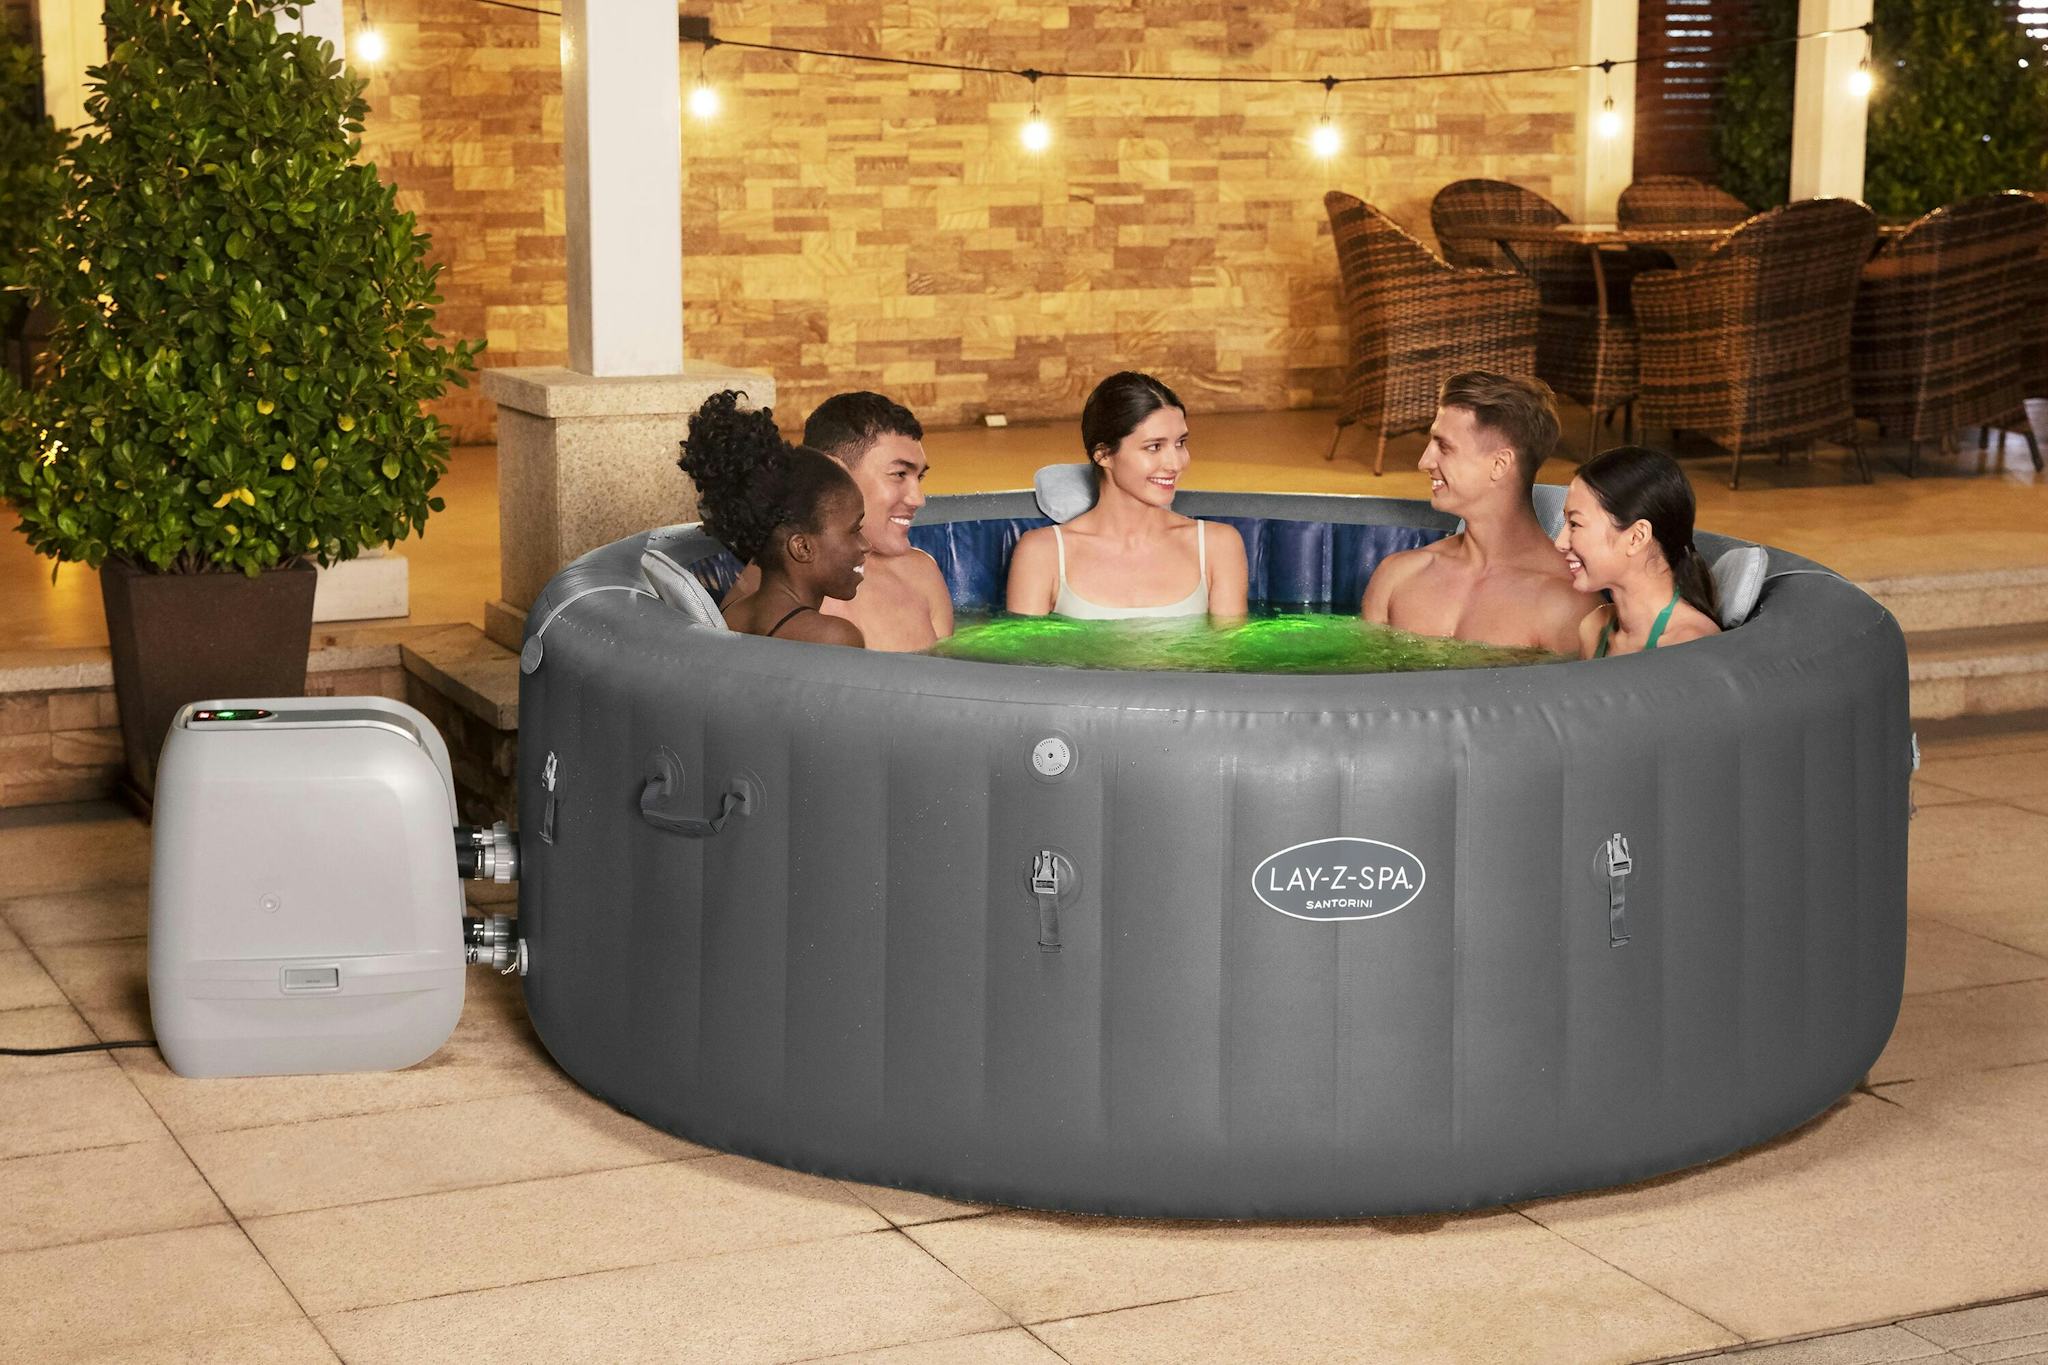 Spas Gonflables Spa gonflable rond Lay-Z-Spa Santorini Hydrojet pro™ 5 - 7 personnes Bestway 8